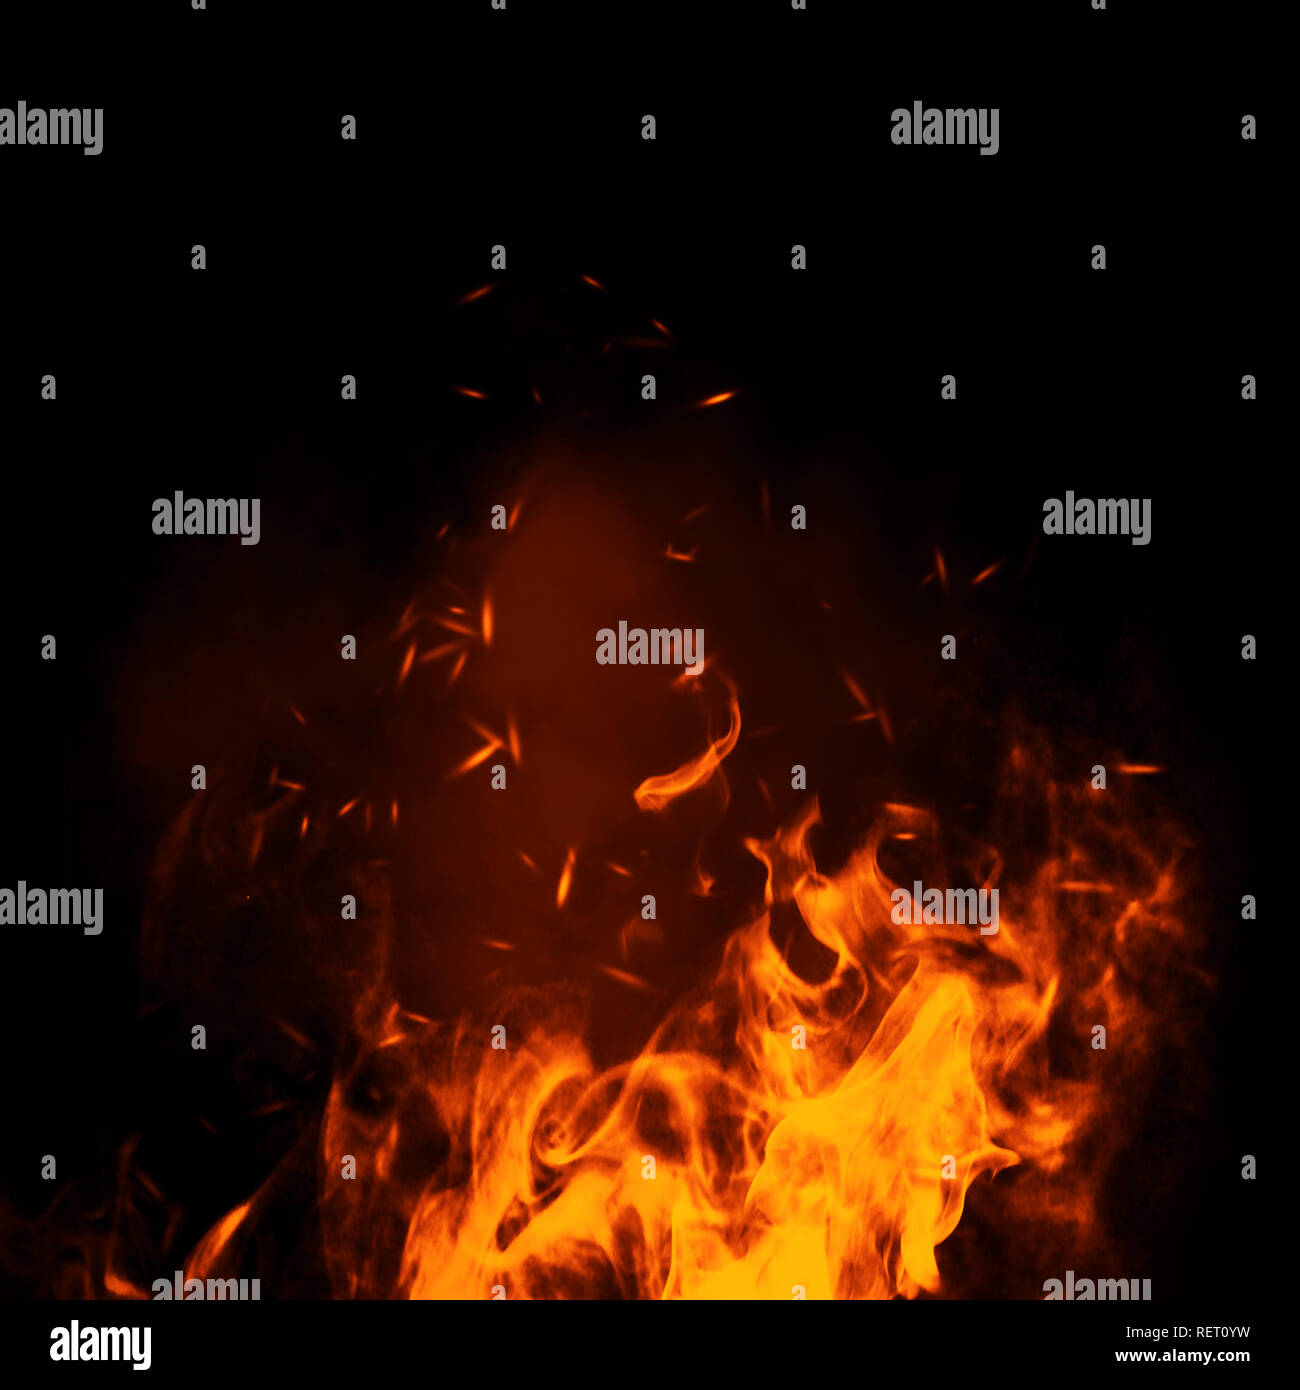 Texture of burn fire with particles embers. Flames on isolated black background. Stock Photo